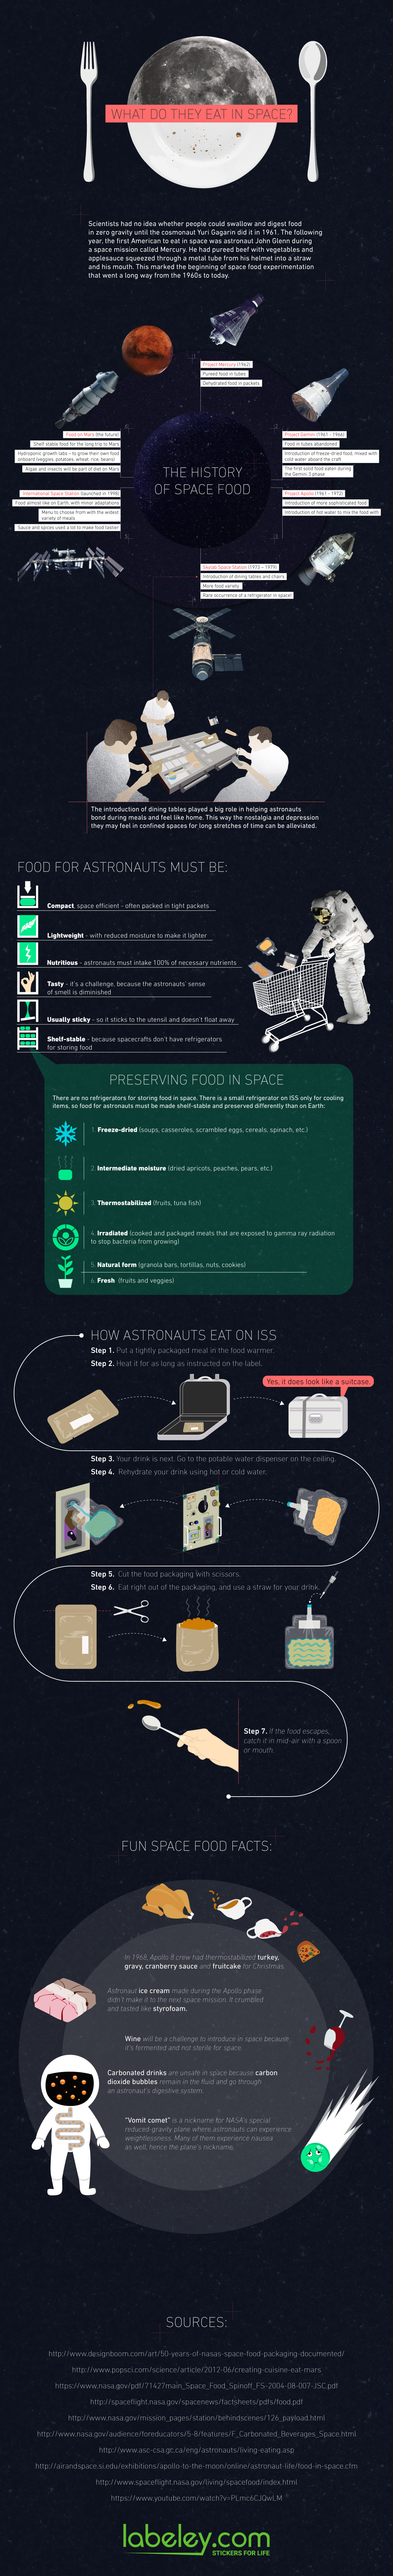 Infographic - Evolution of Food in Space: From Bland Puree to Almost Like on Earth